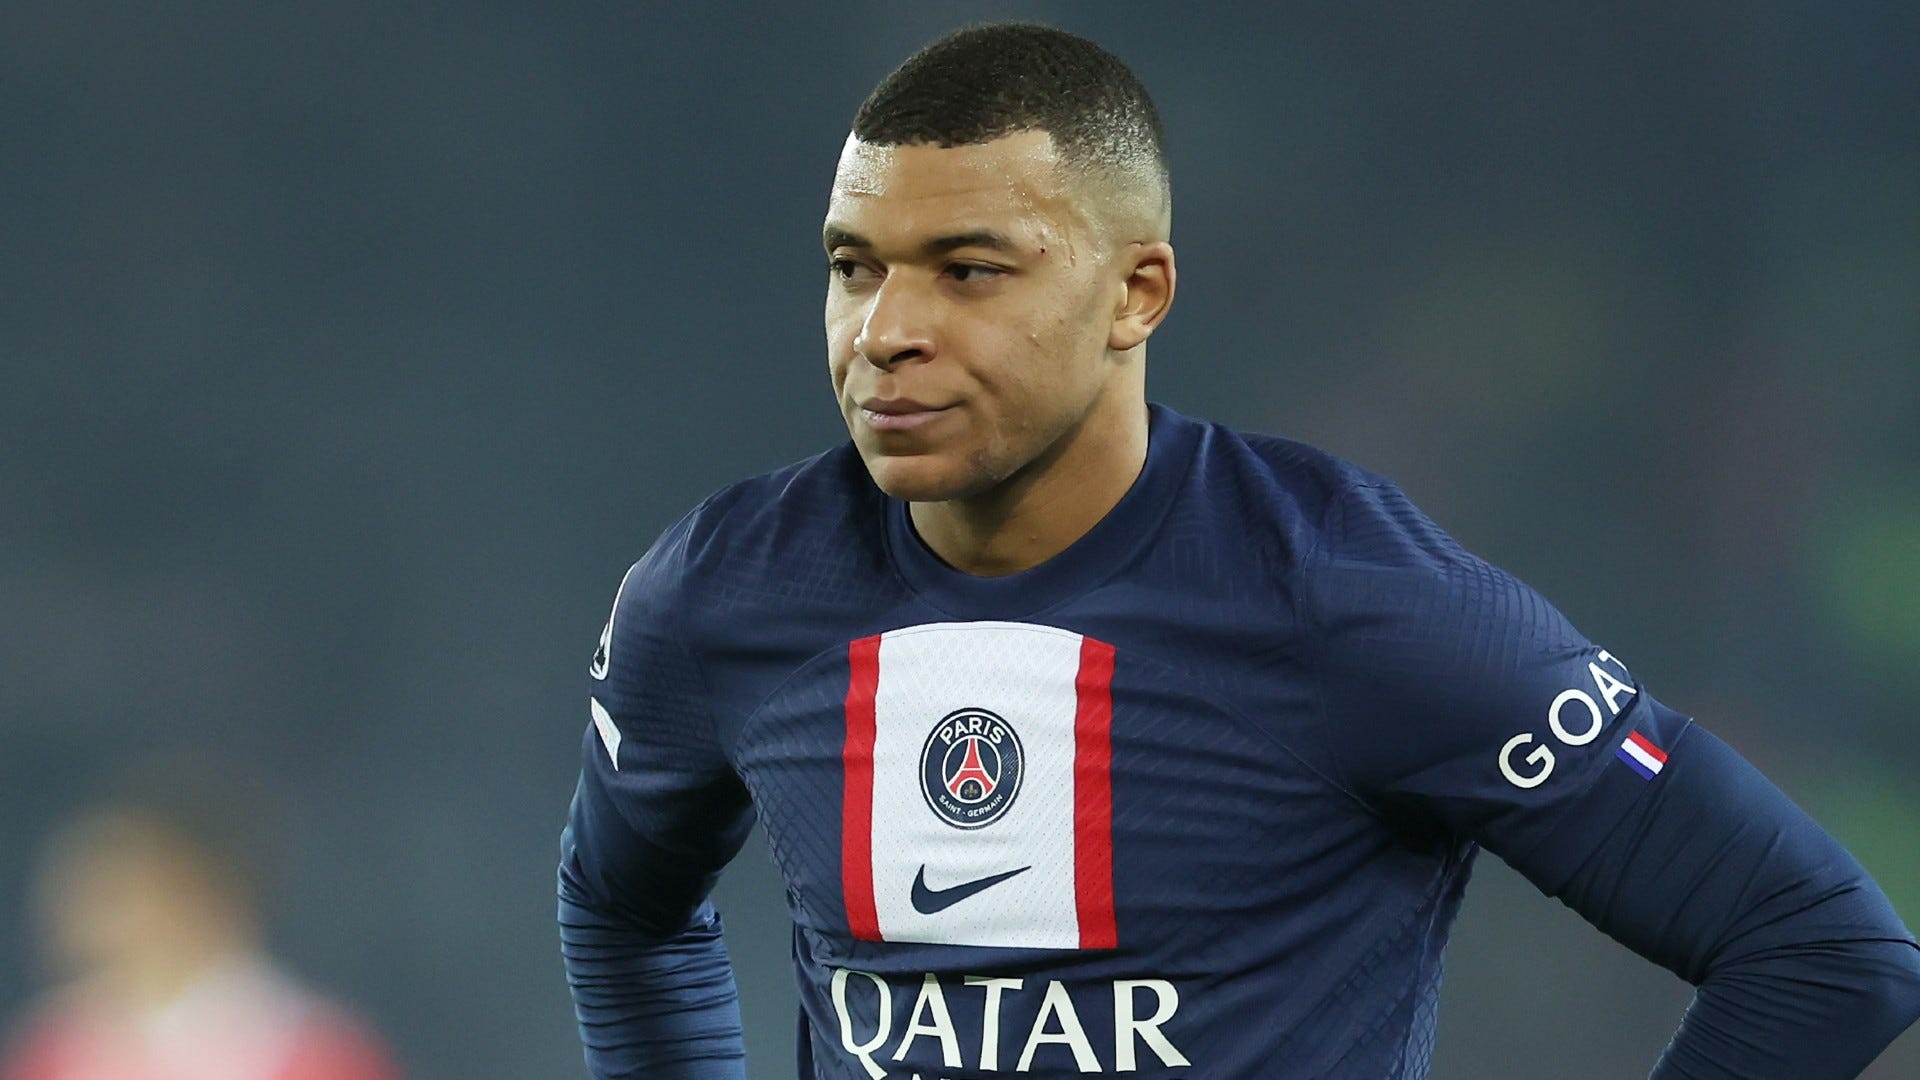 Mbappé Ready To Discuss Contract Extension With PSG Until Summer 2025